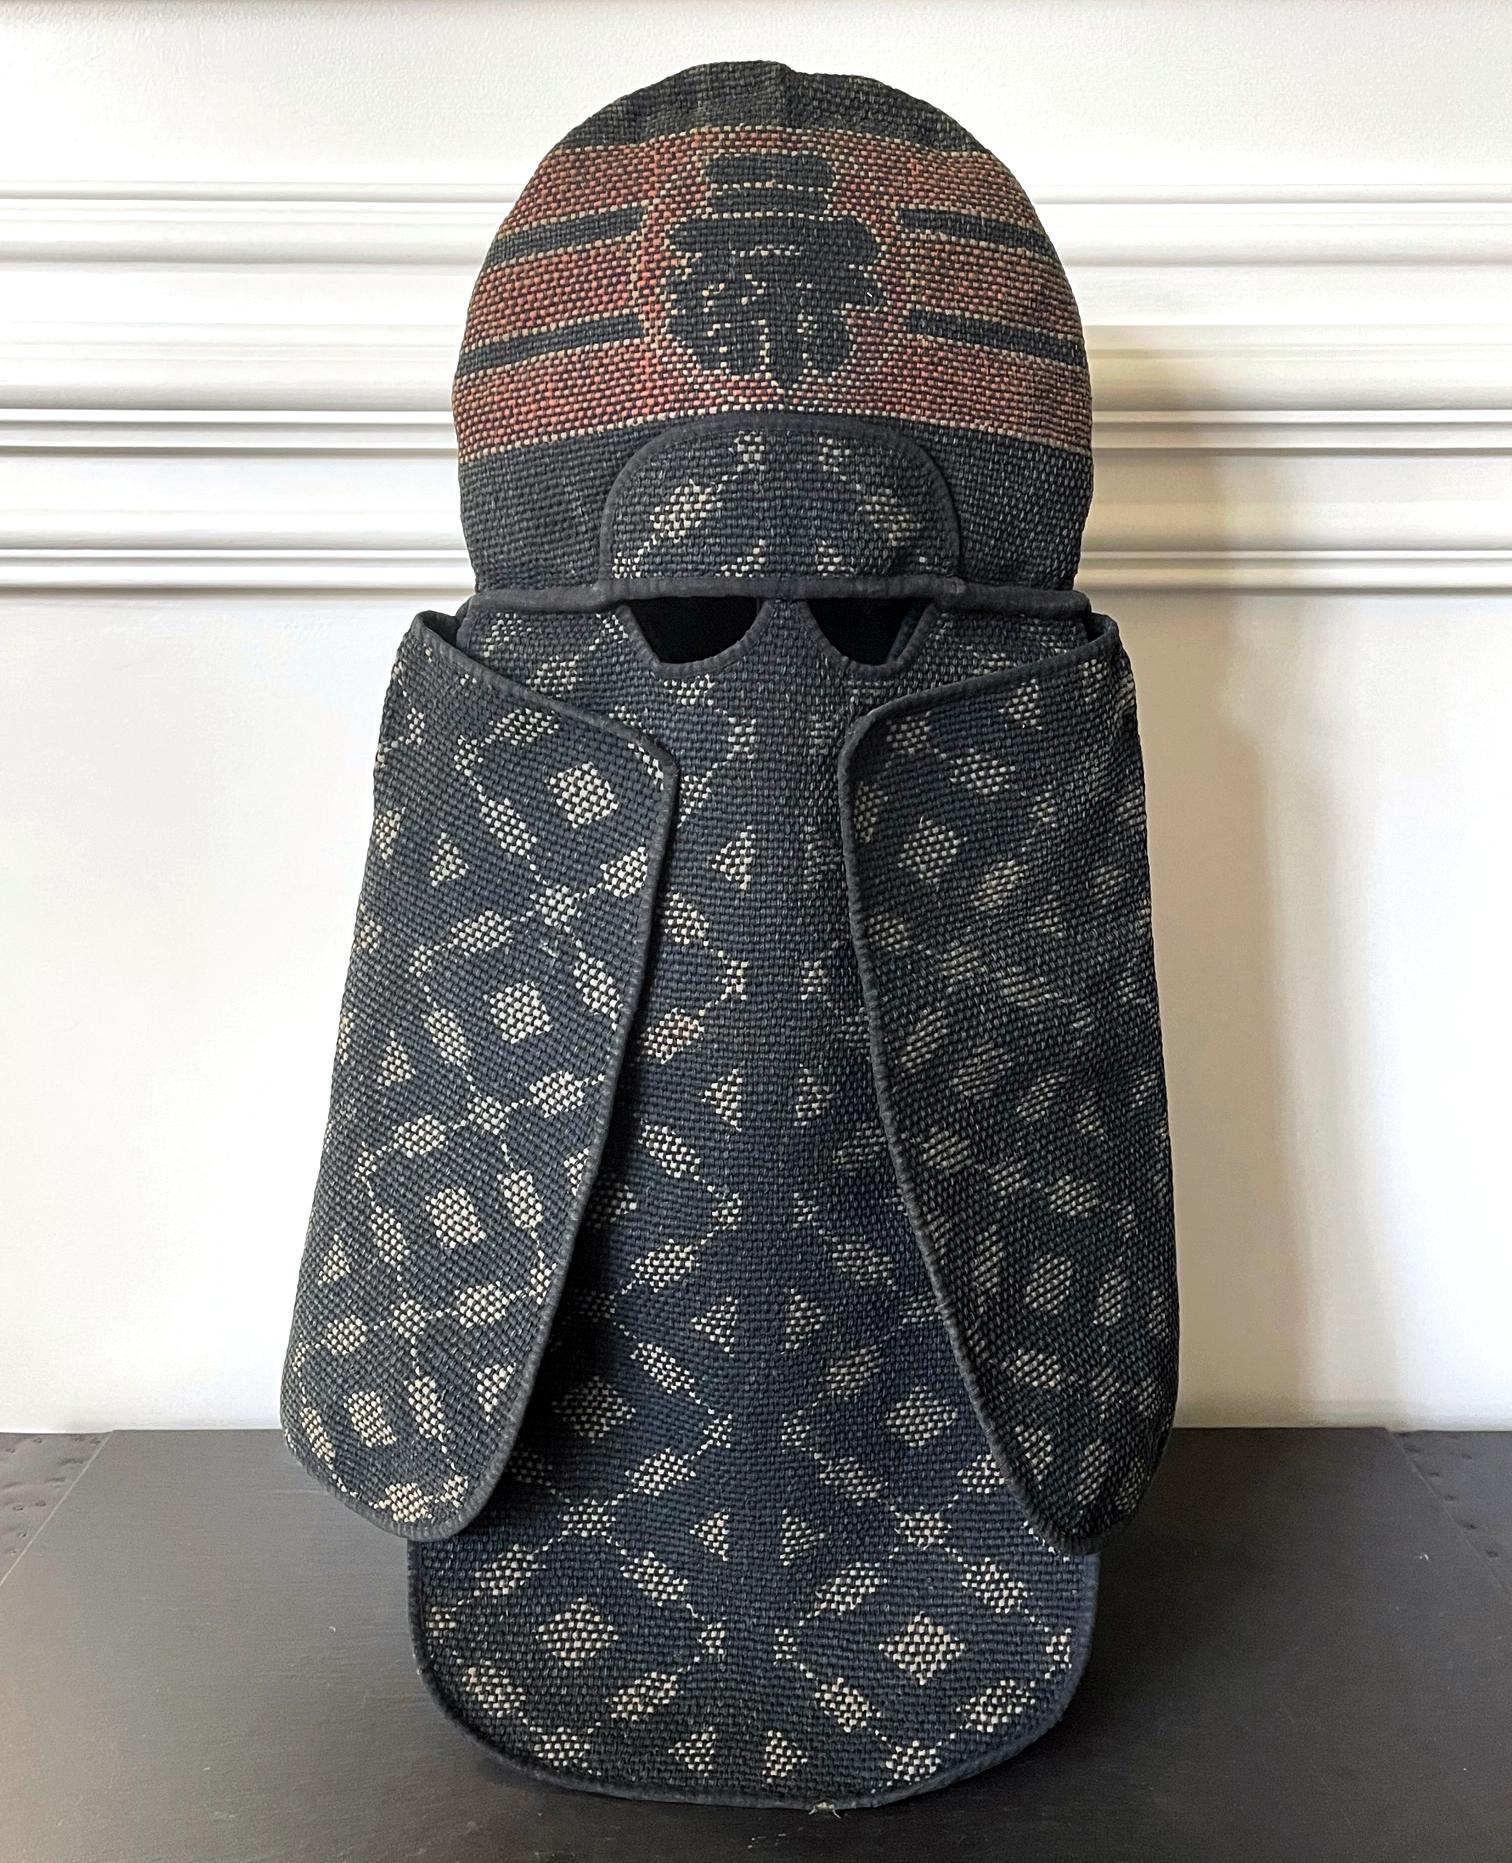 A well-preserved Japanese fireman's hood (known as hikeshi zukin in Japanese) circa 1900s, late Meiji period. Woven with thick cotton with sashiko (cotton thread quilting) and katazome (stencil resist dye), this is a piece of vernacular textile art